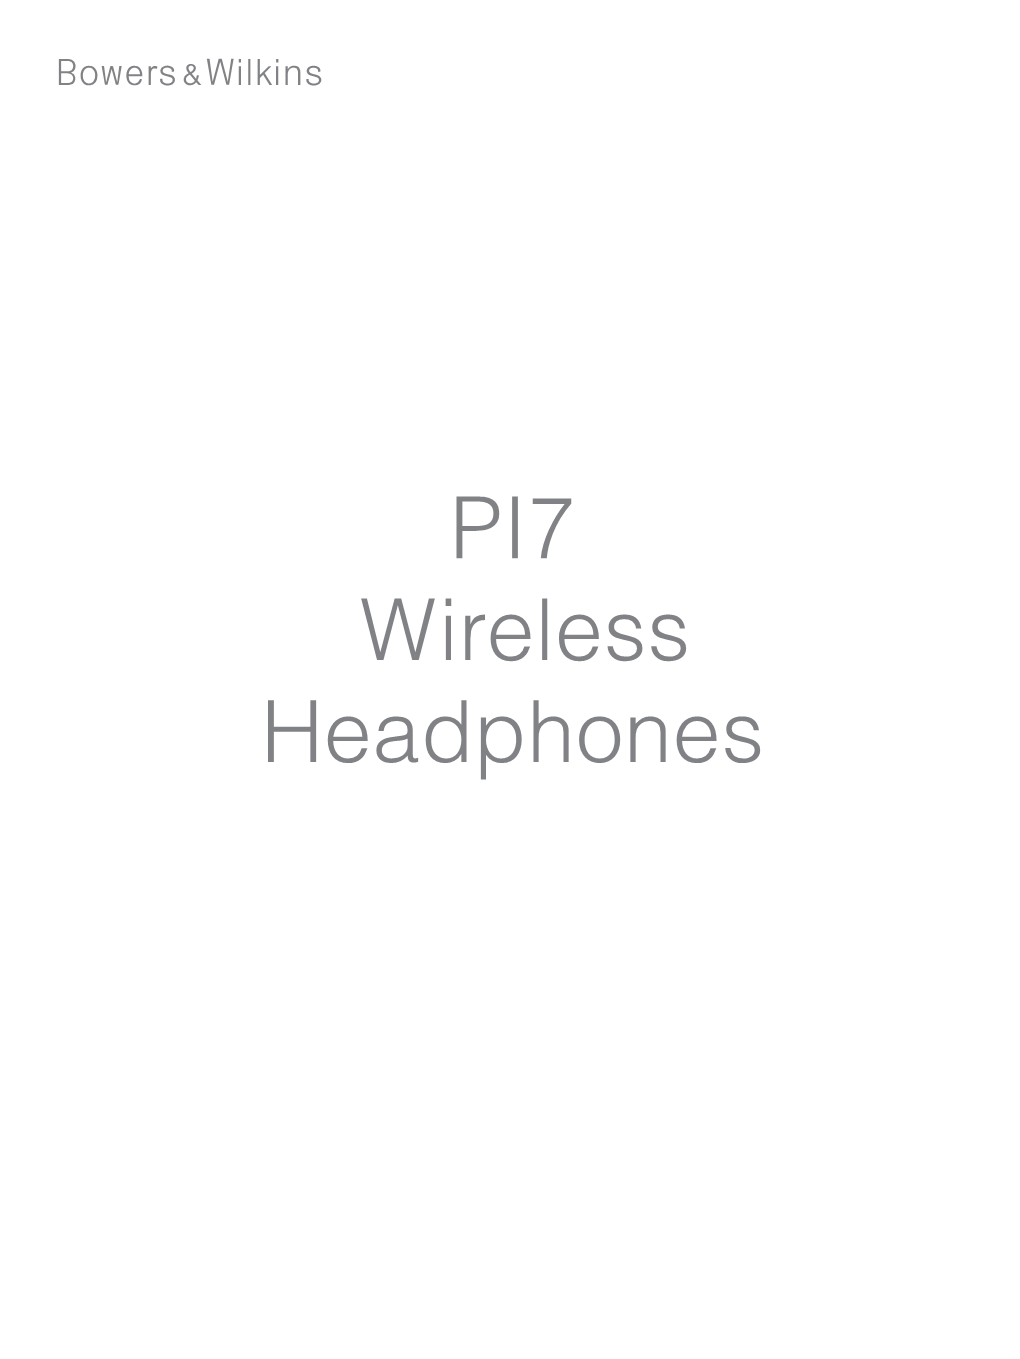 PI7 Wireless Headphones Welcome to Bowers & Wilkins and PI77 ENGLISH Thank You for Choosing Bowers & Wilkins